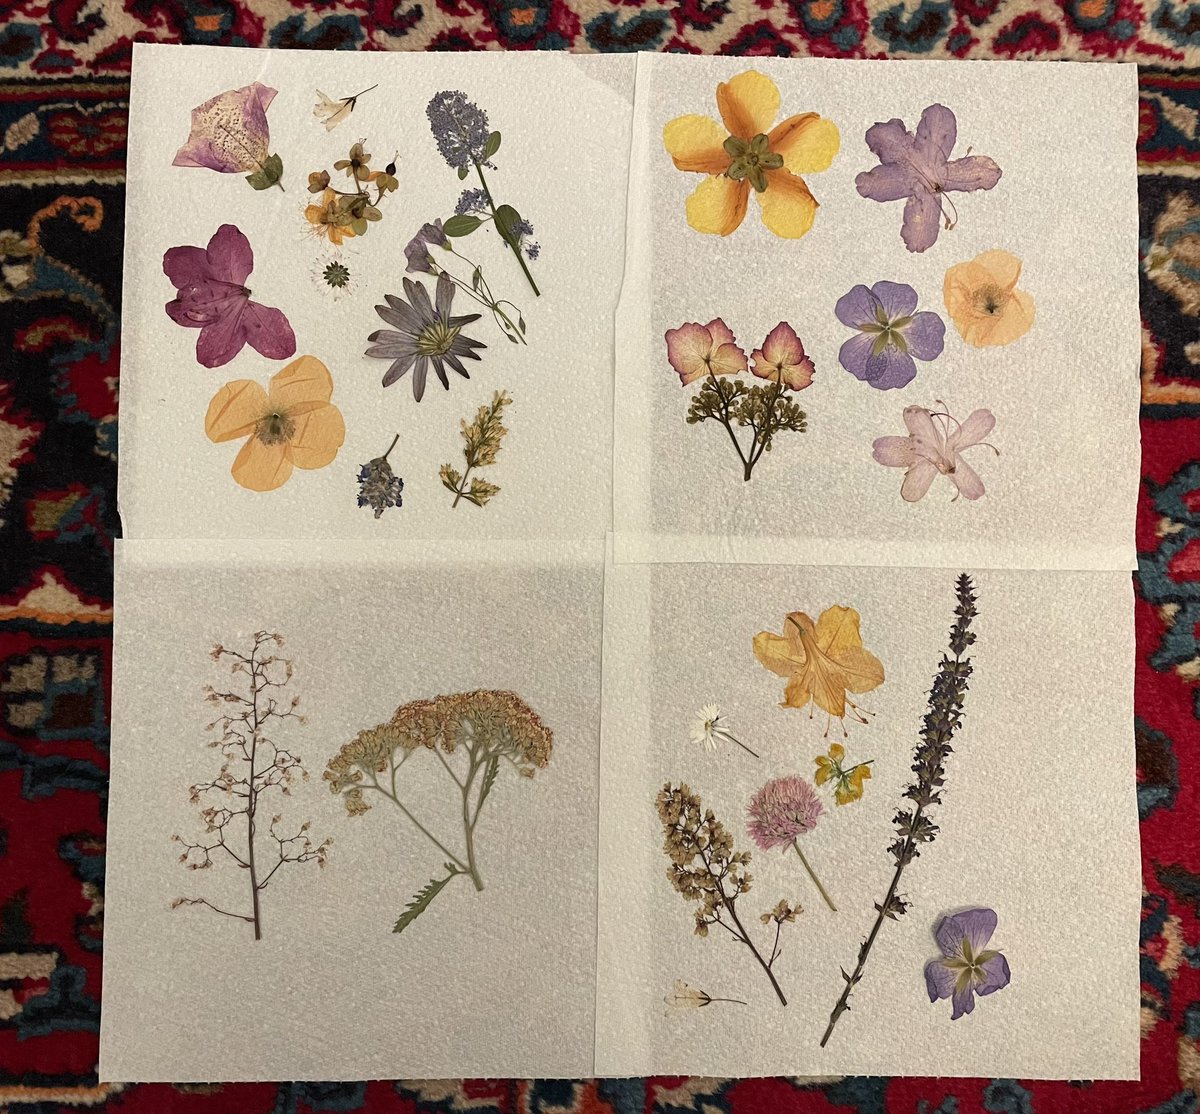 From the longest day to the shortest. At the summer solstice I took cuttings of all the flowers in my garden, to be pressed and unveiled on the winter solstice. Here they are! Lovely moment of joy in the depths of winter. Thank you @porridgebrain for the inspiration! #Solstice